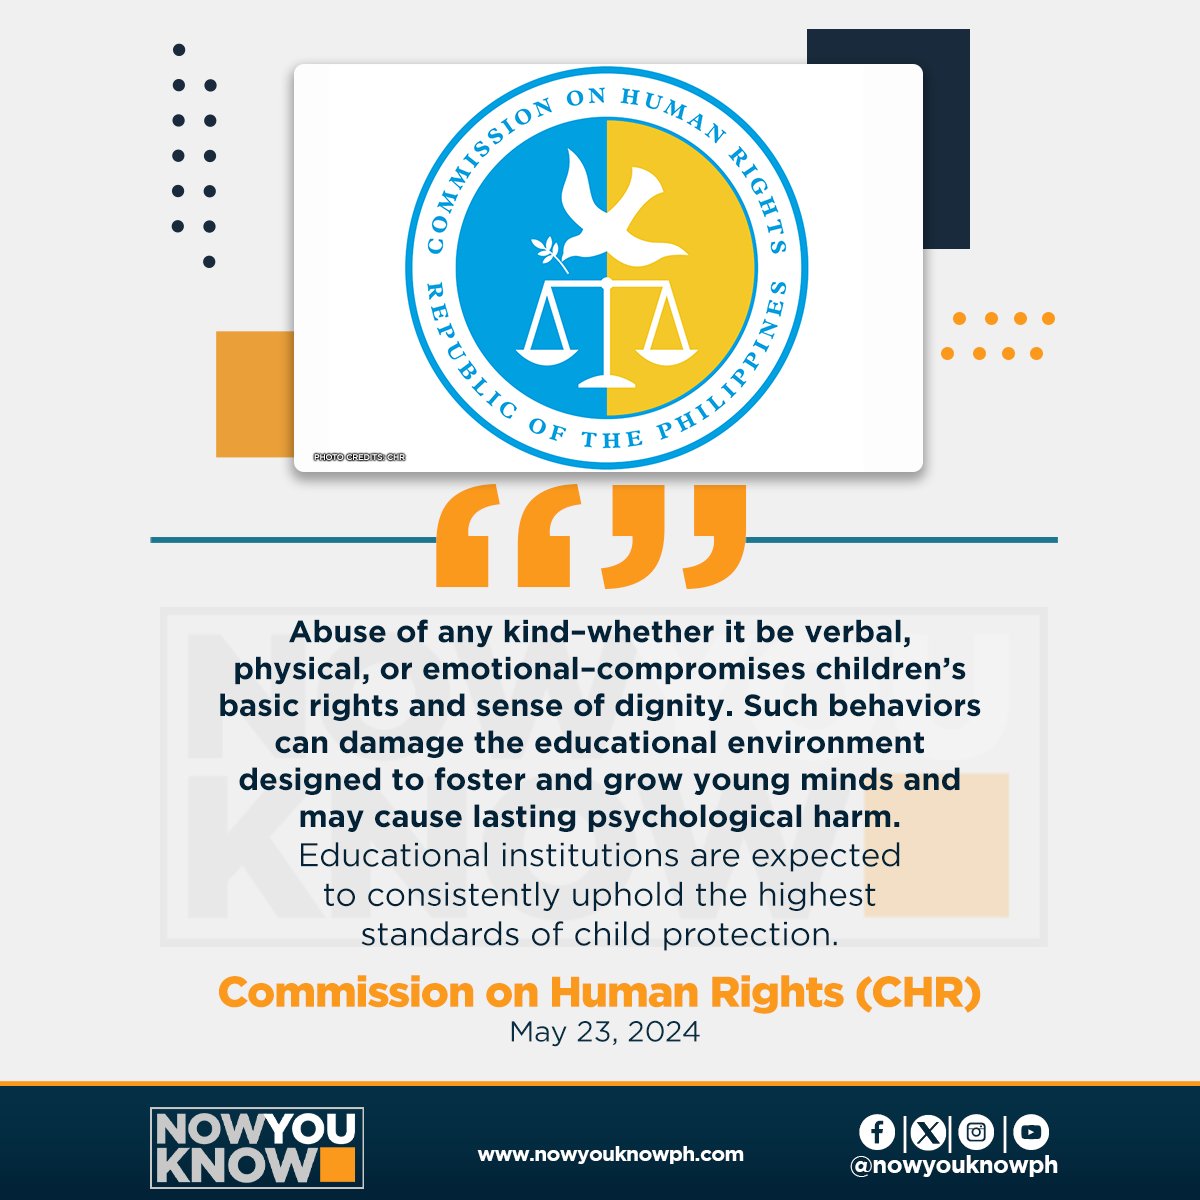 The Commission on Human Rights (CHR) said on Thursday that incidents of abuse should not happen in schools as these can adversely affect children’s development and their dignity. READ: tinyurl.com/45yapujh 📰Inquirer.net